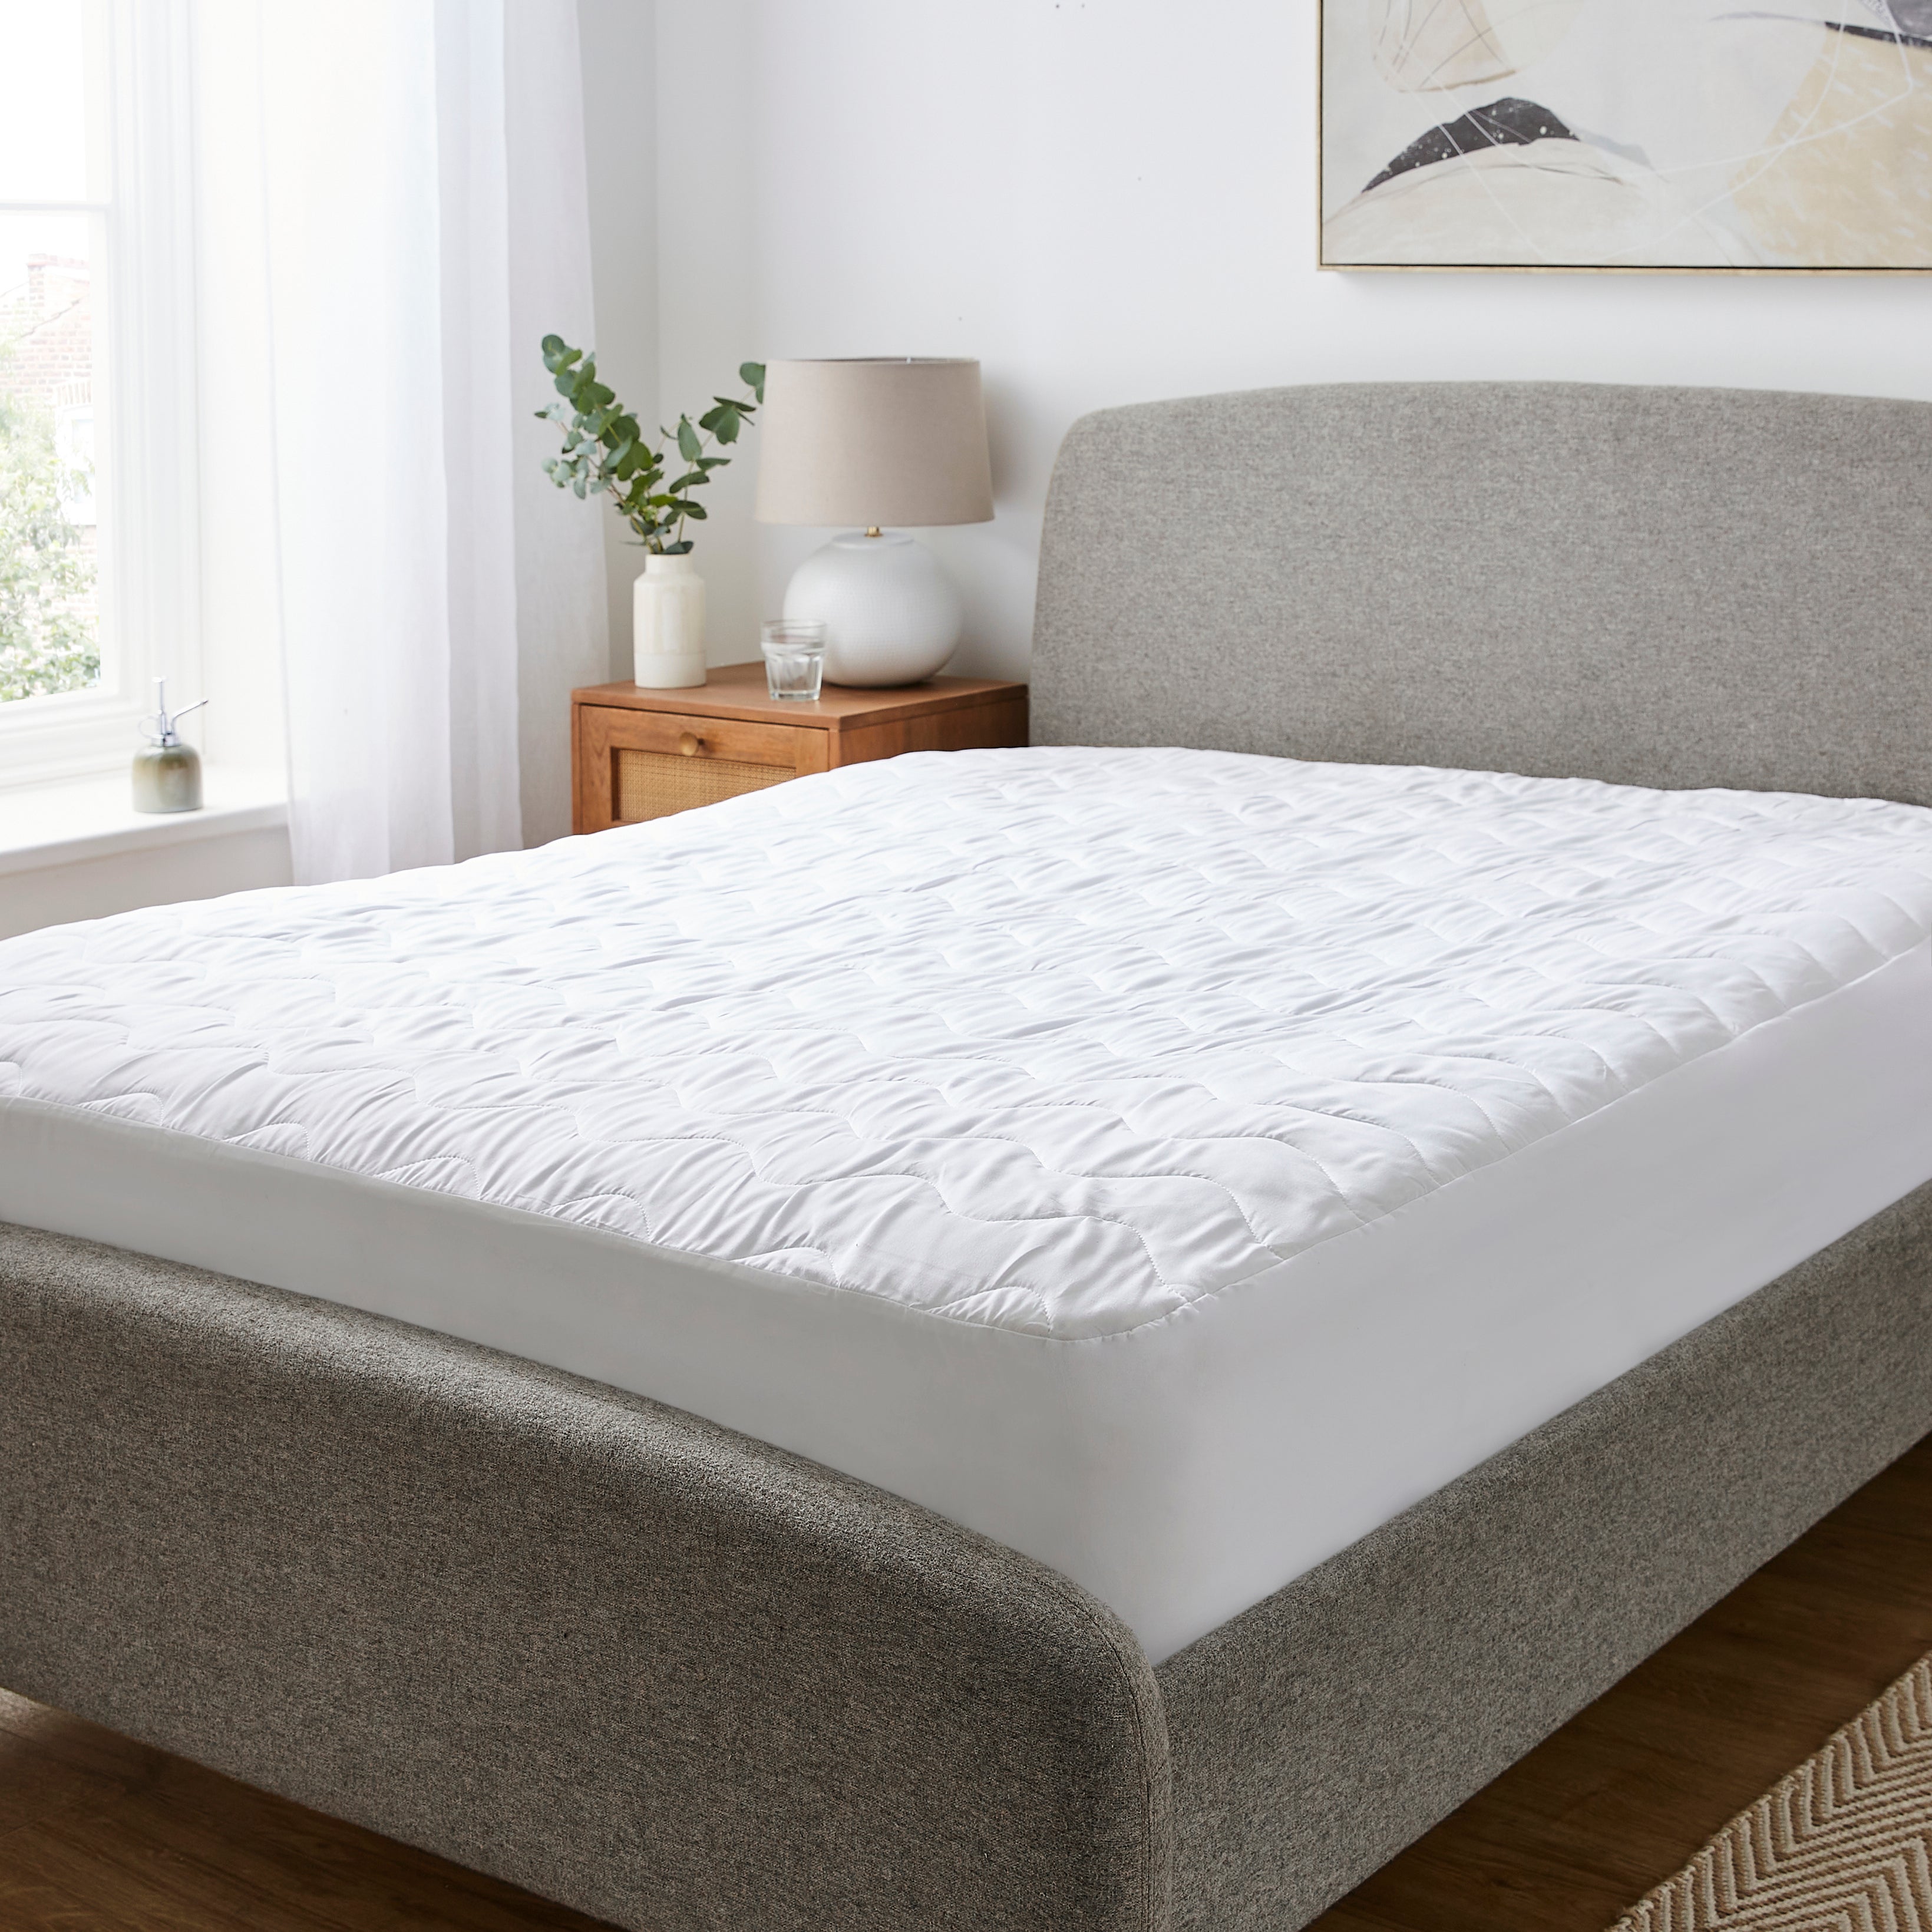 Soft and Snug Anti Allergy Mattress Protector